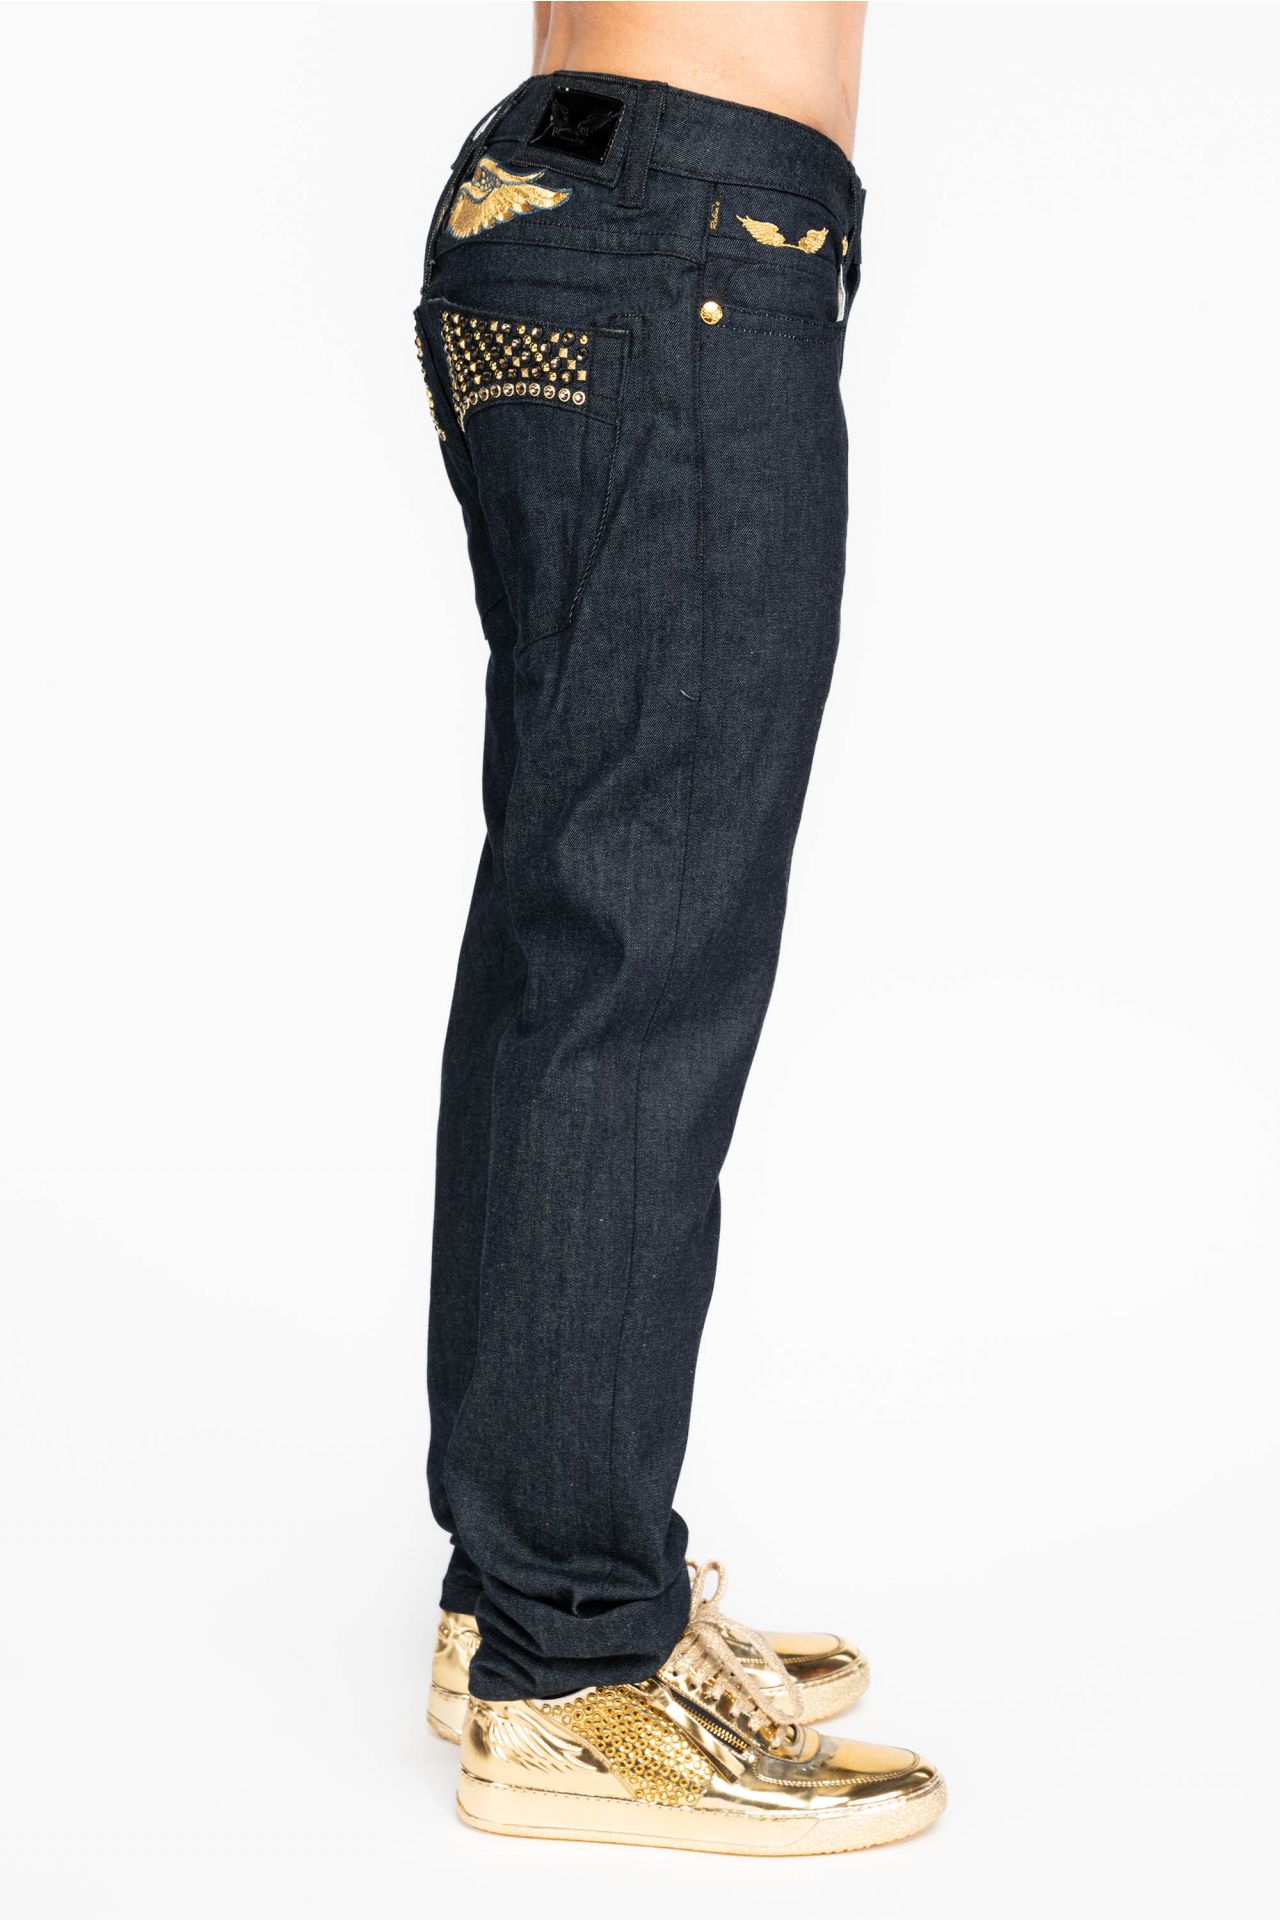 MENS RAW DENIM SLIM FIT JEANS WITH GOLD DUOTONE WINGS EMBROIDERY STUDS AND CRYSTALS